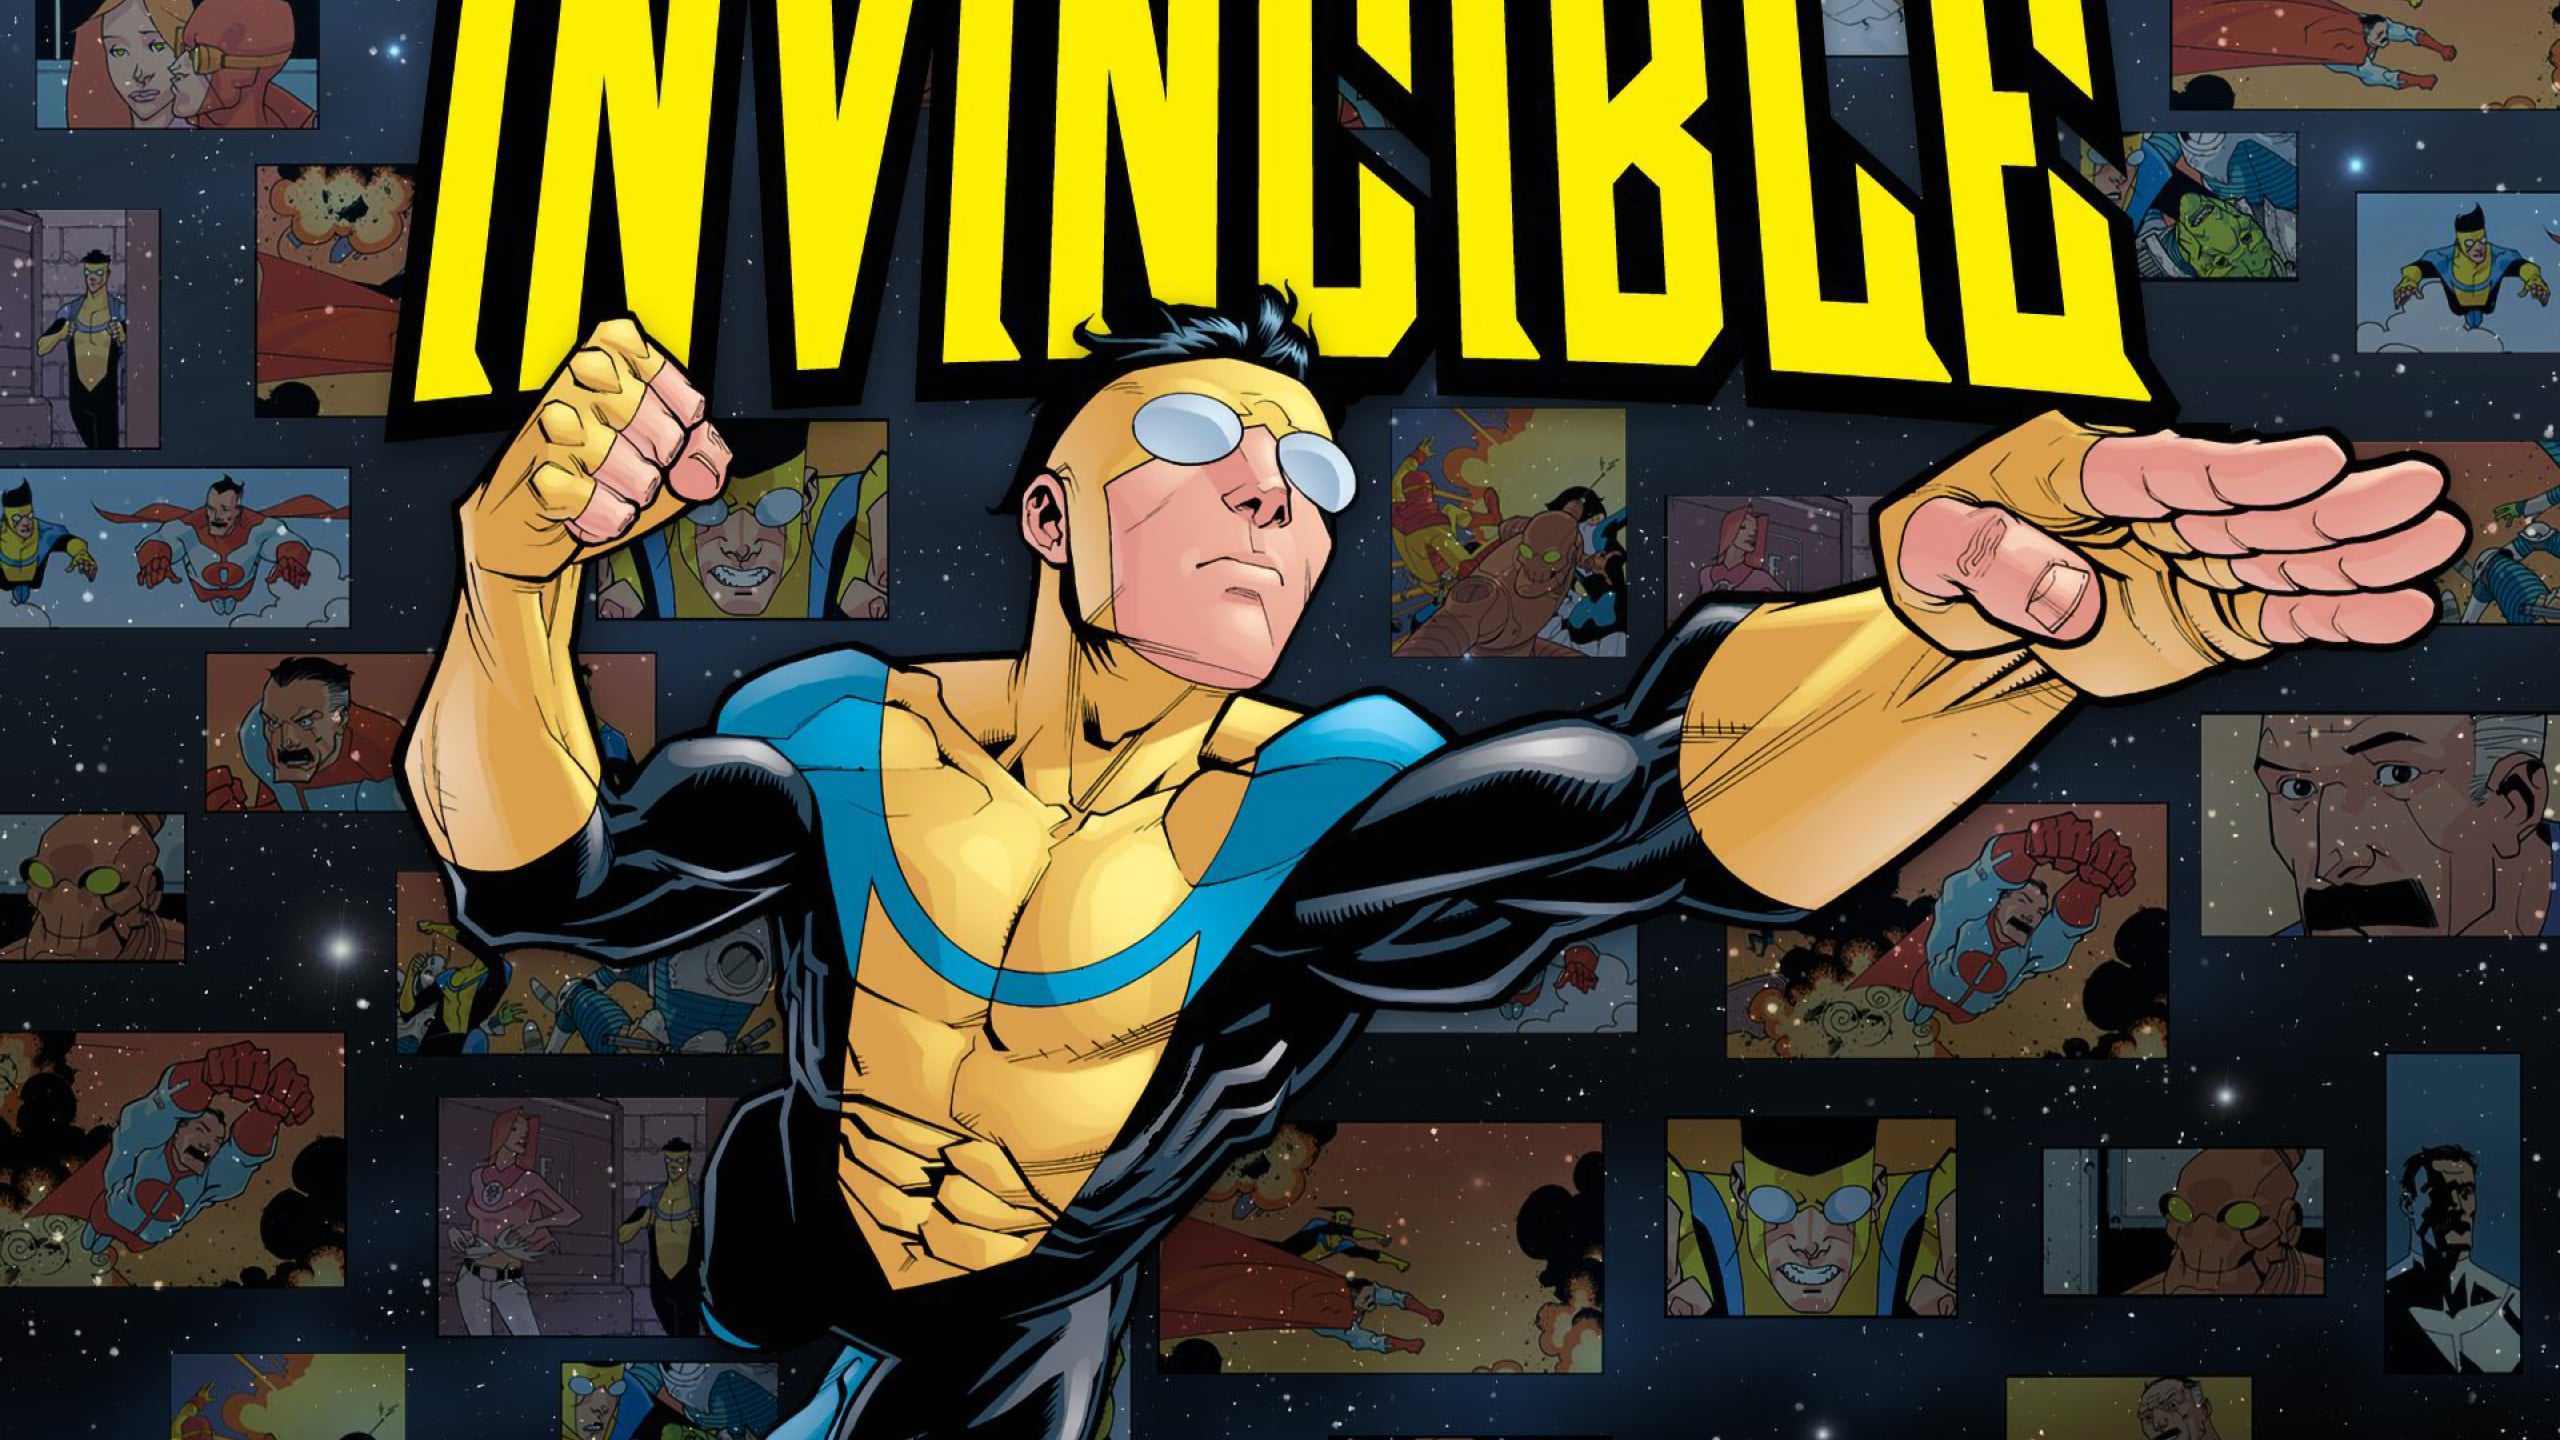 Download Invincible Wallpaper for free, use for mobile and desktop. 